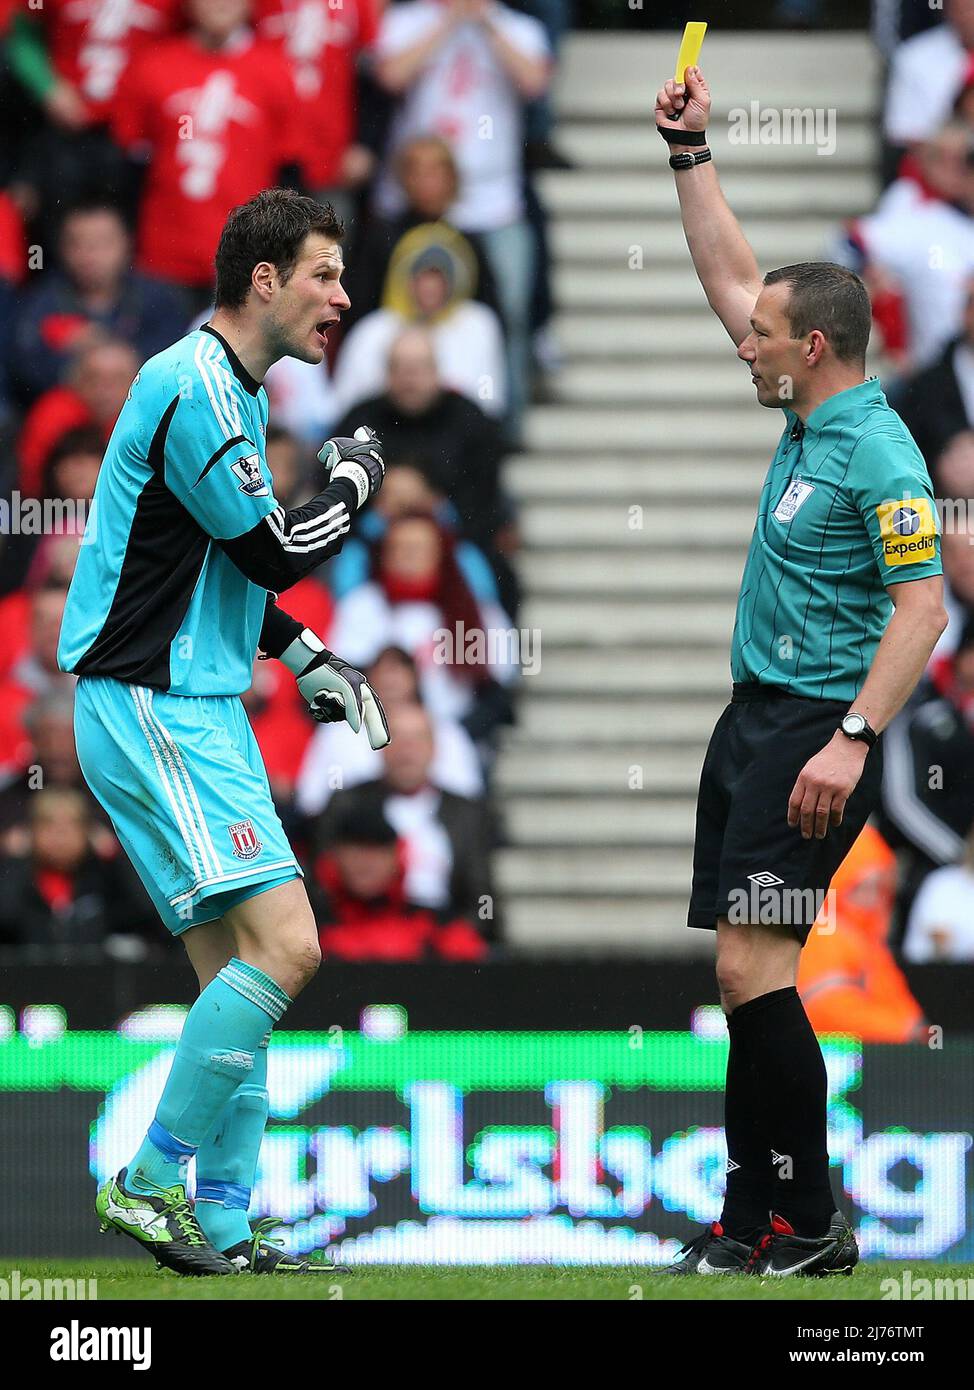 12 May 2013 - Soccer - Barclays Premier League - Stoke City Vs Tottenham Hotspur - Asmir Begovic of Stoke City recieves a yellow card from referee Kevin Friend after a disagreement over an injury -  Photographer: Paul Roberts / Pathos. Stock Photo